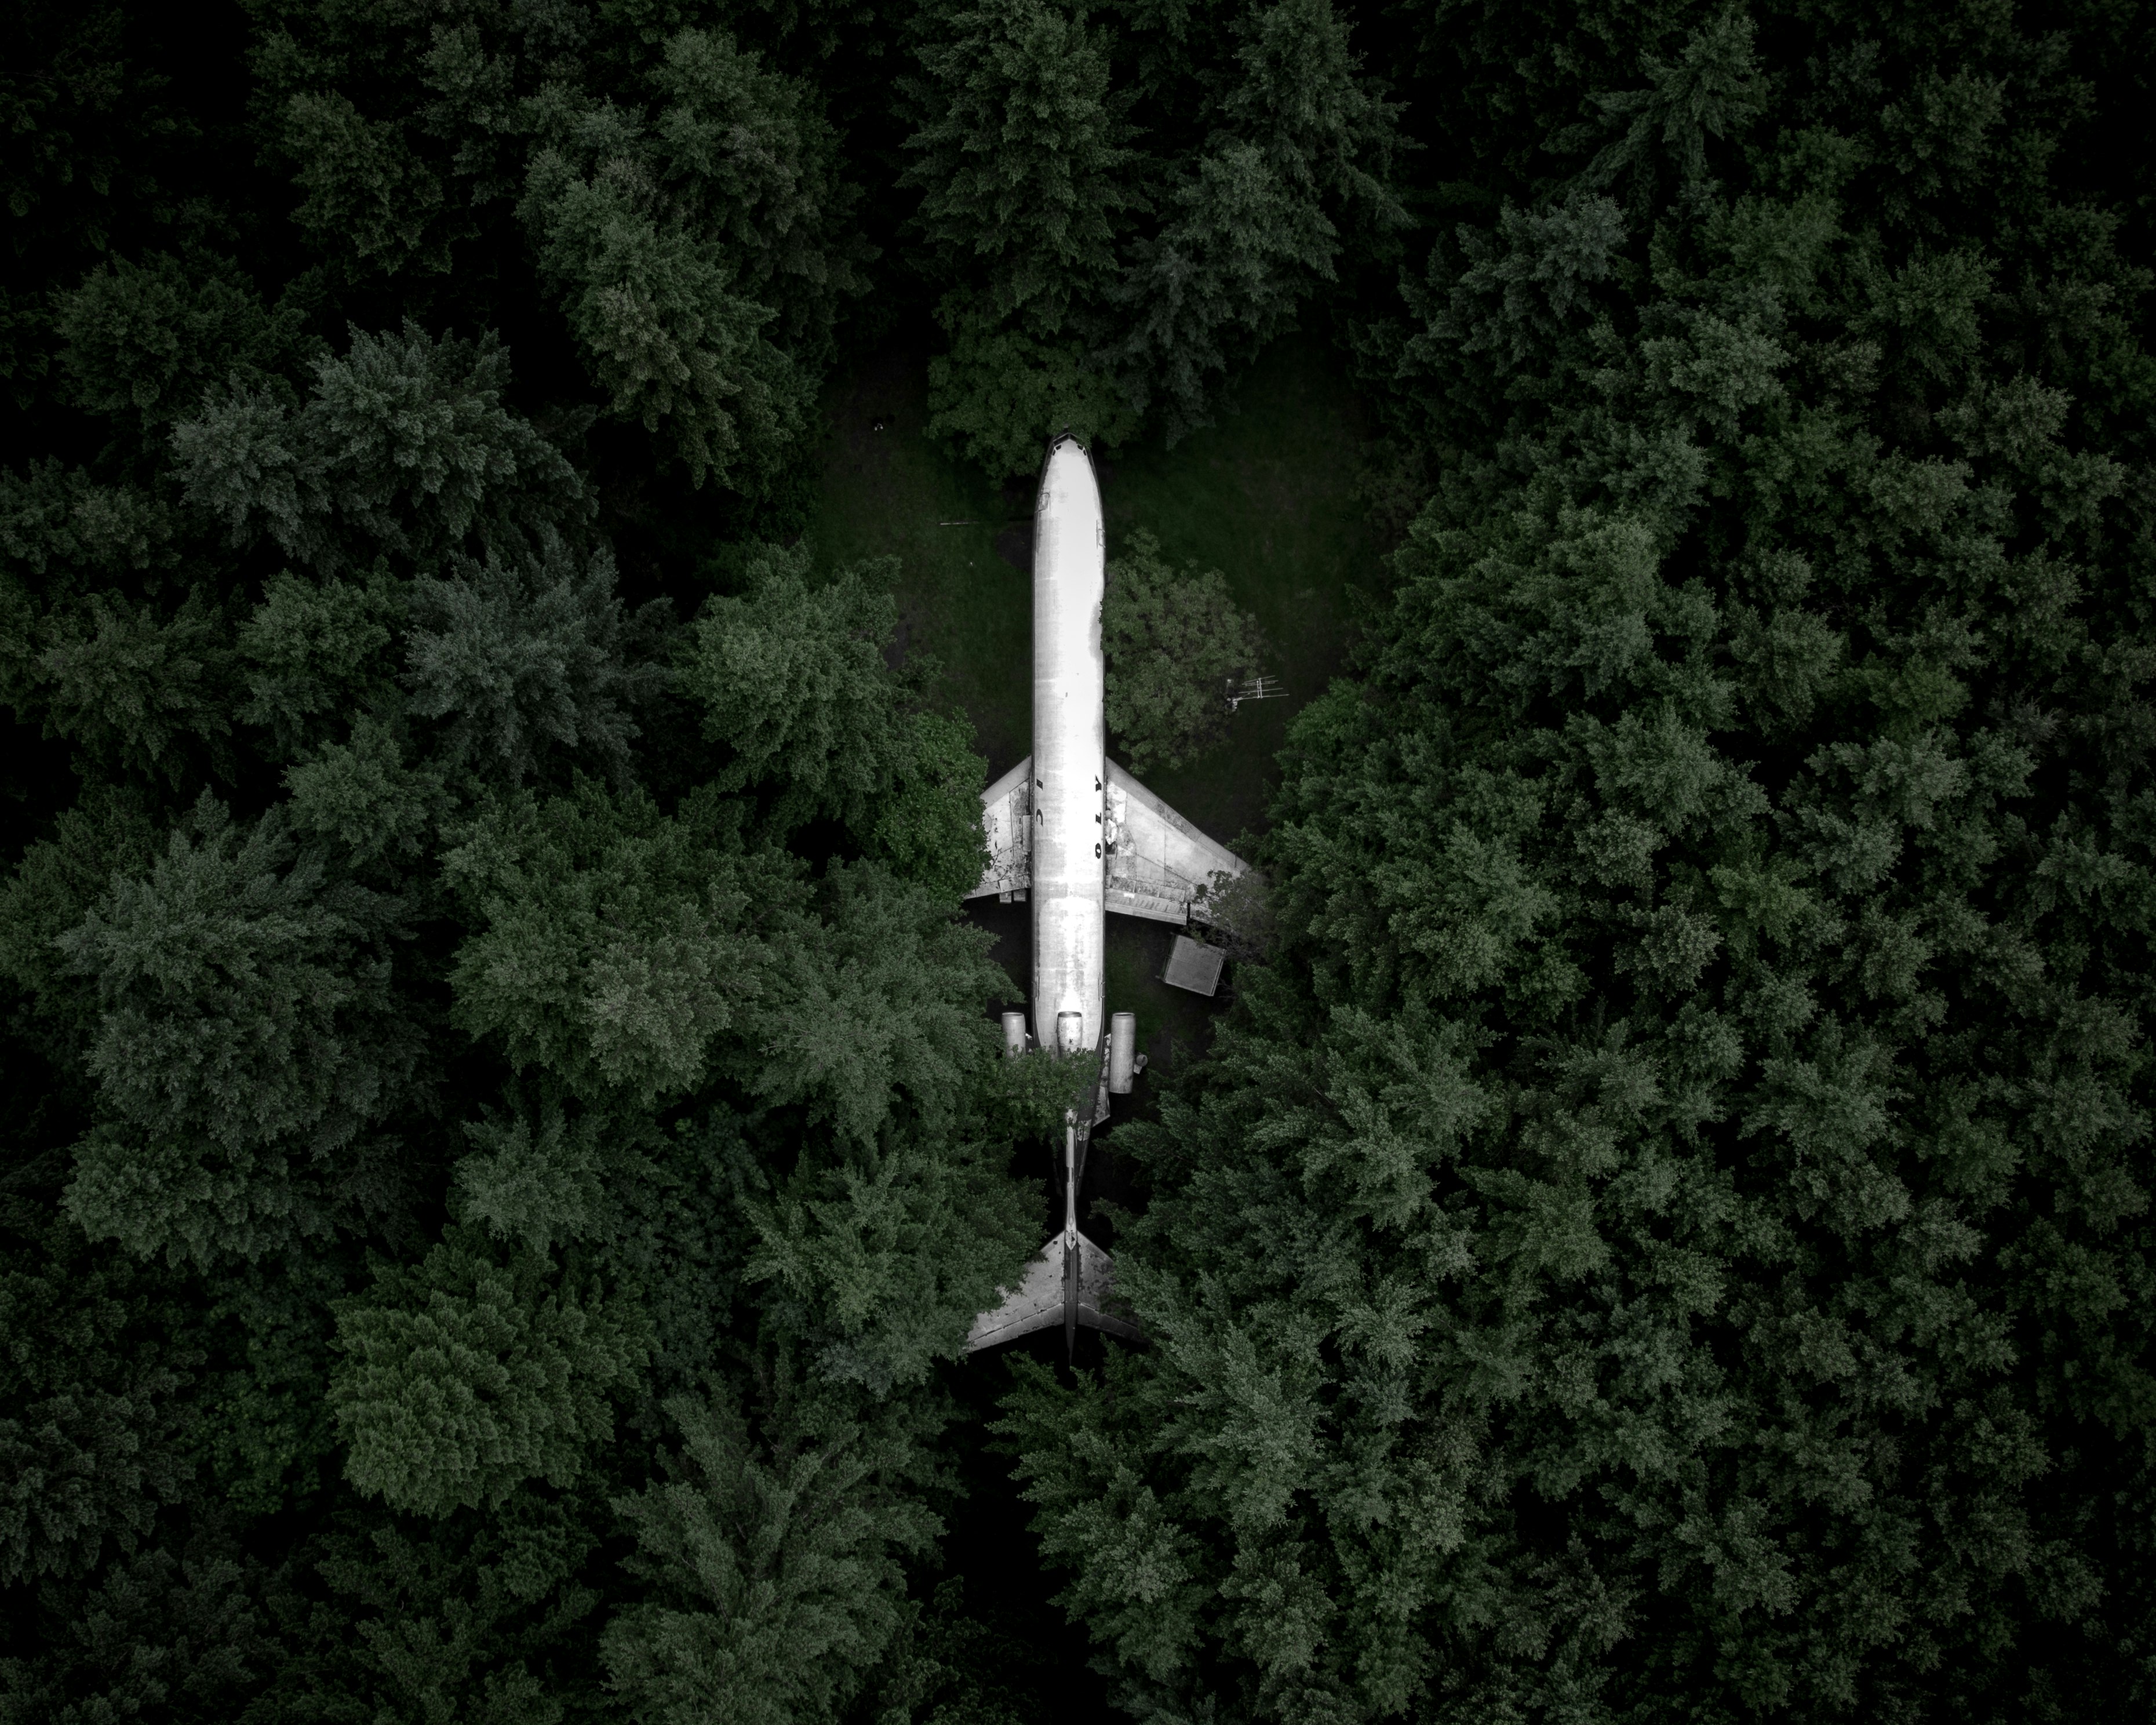 white airplane in the middle of the forest during day